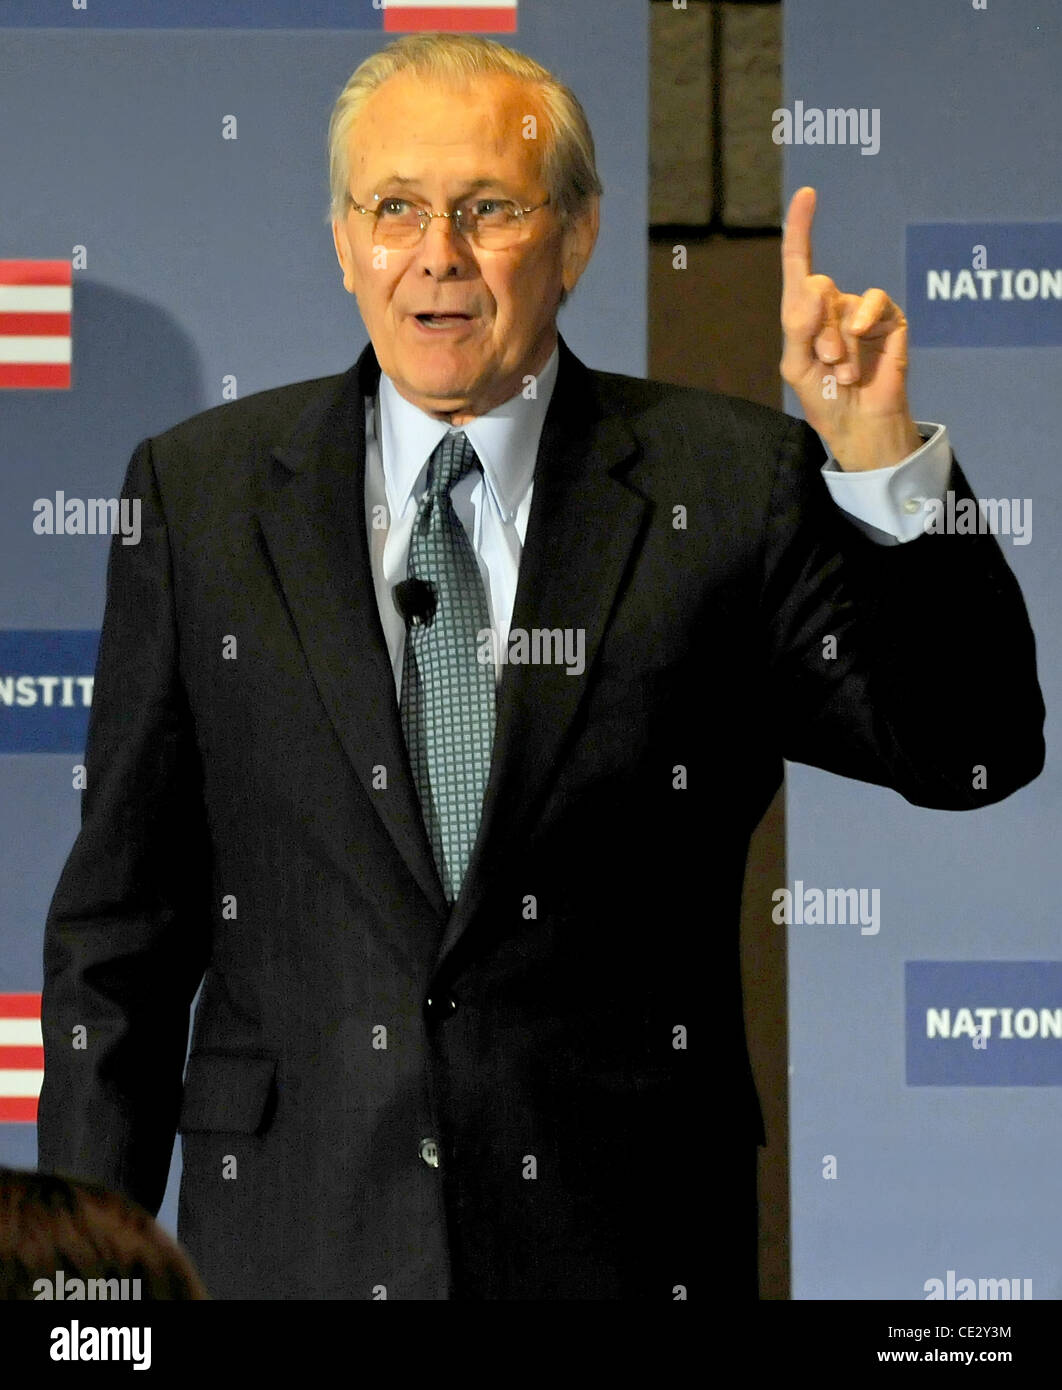 Donald Rumsfeld 21st United States Secretary of Defense promotes his book 'Known and Unknown: A Memoir' at The National Constitution Center Philadelphia, Pennsylvania - 09.02.11 Stock Photo